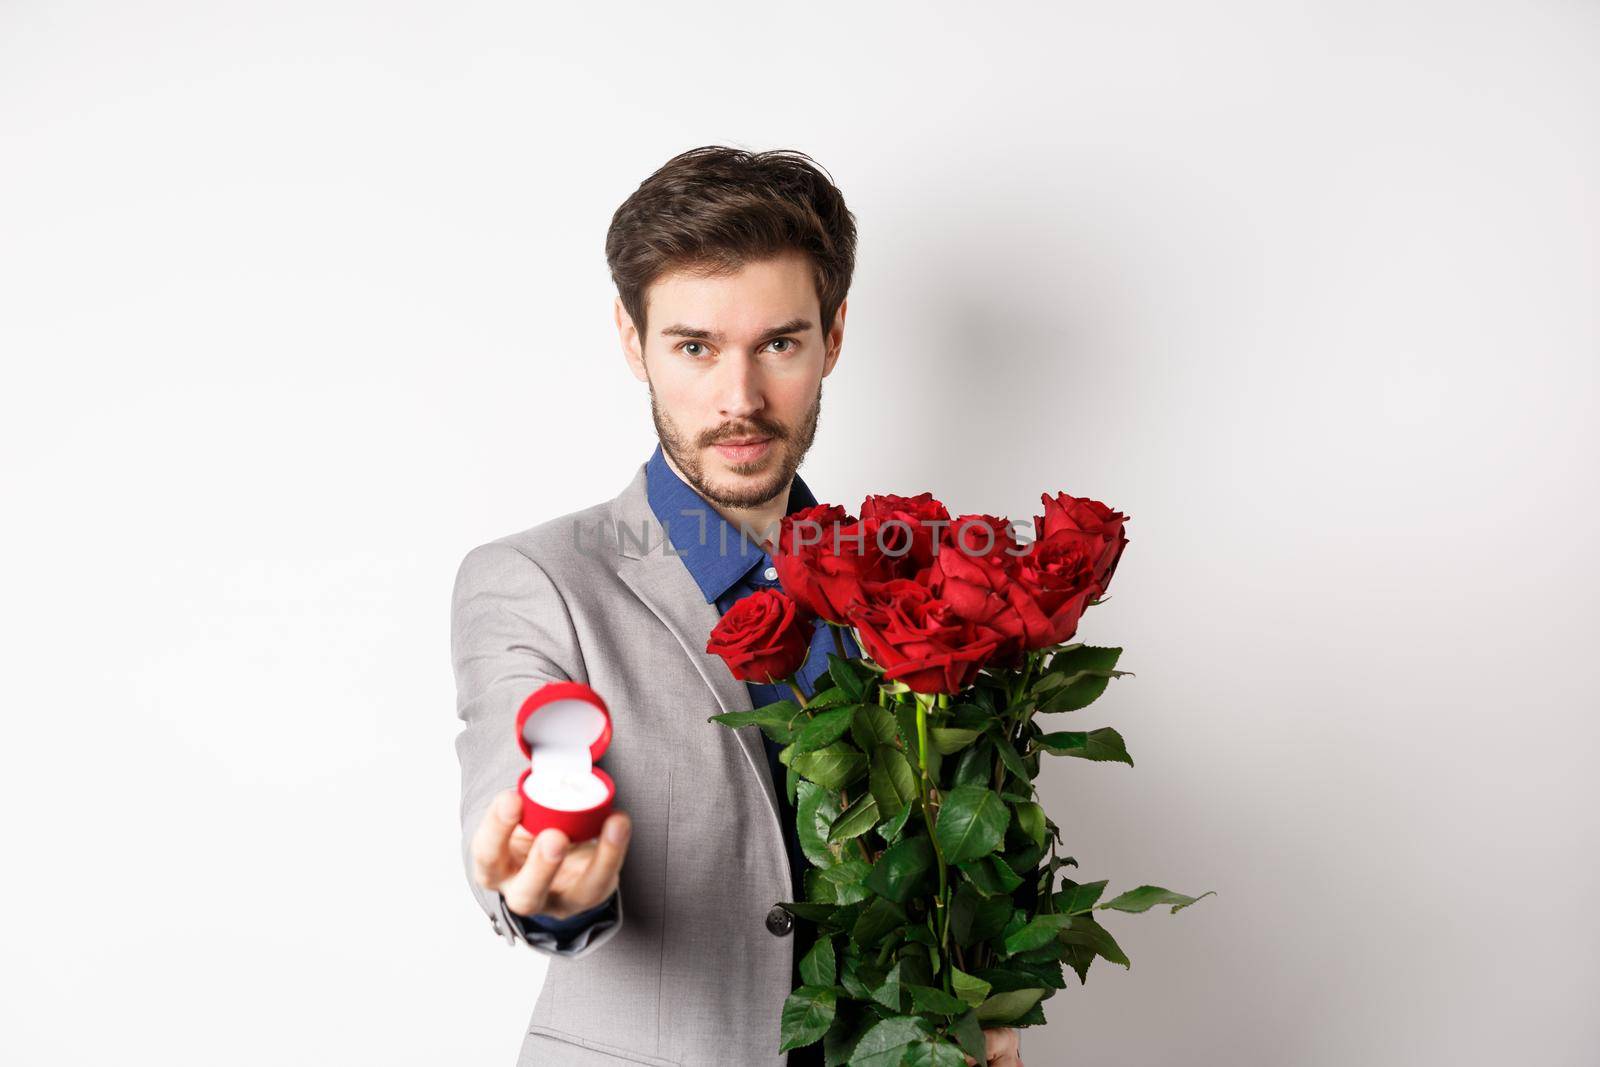 Handsome young man making a marriage proposal, stretch out hand with engagement ring and holding red roses, asking to marry him, looking confident at lover, white background.